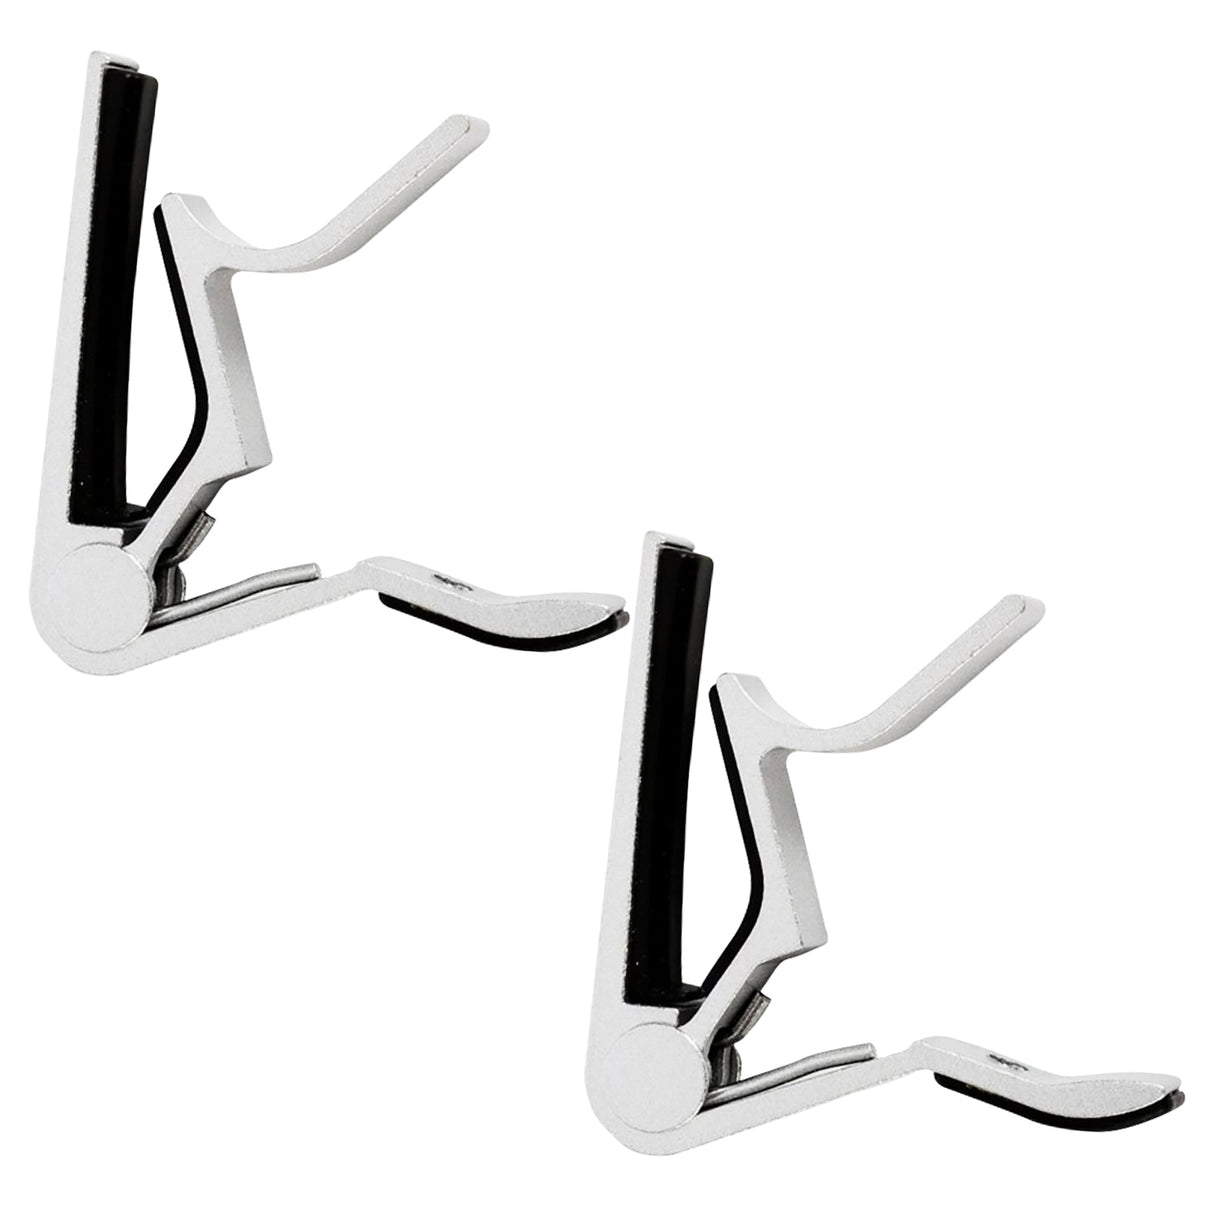 5 Core Guitar Capo White 2 Pack | 6-String Capo for Acoustic and Electric Guitars, Bass, Mandolin, Ukulele- CAPO WH 2 Pcs